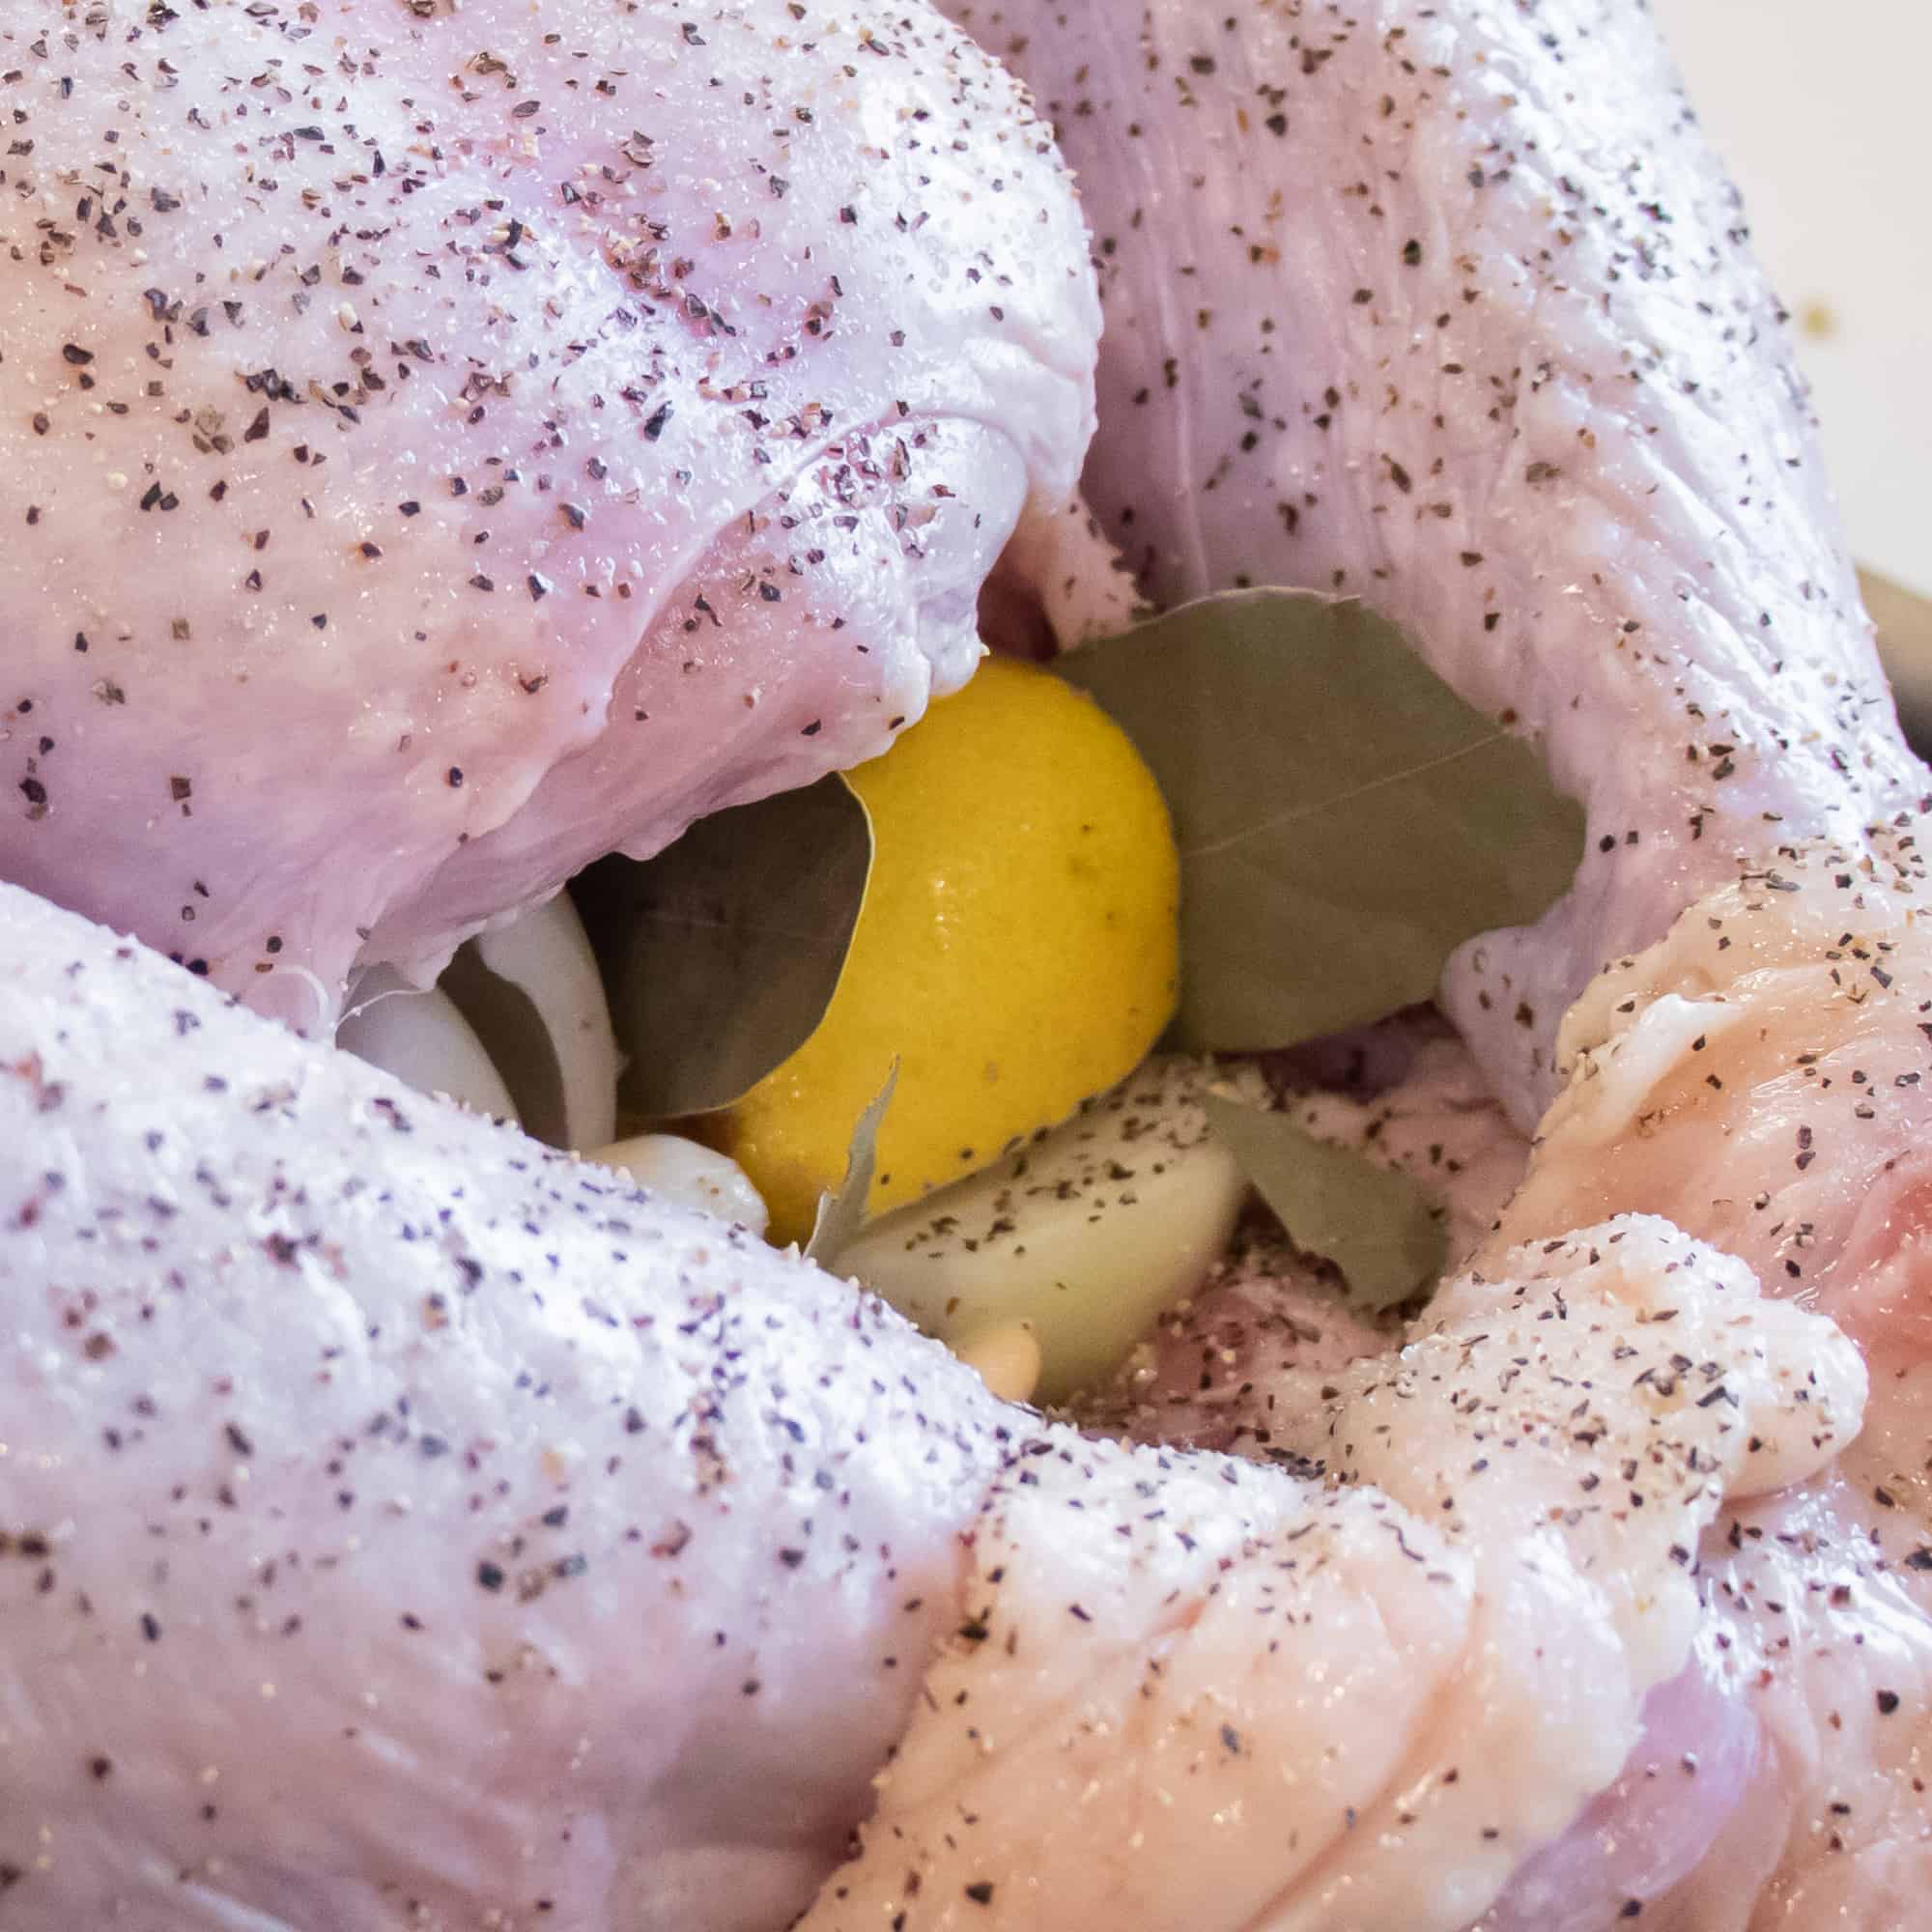 Fill the turkey with all sorts of aromatic ingredients